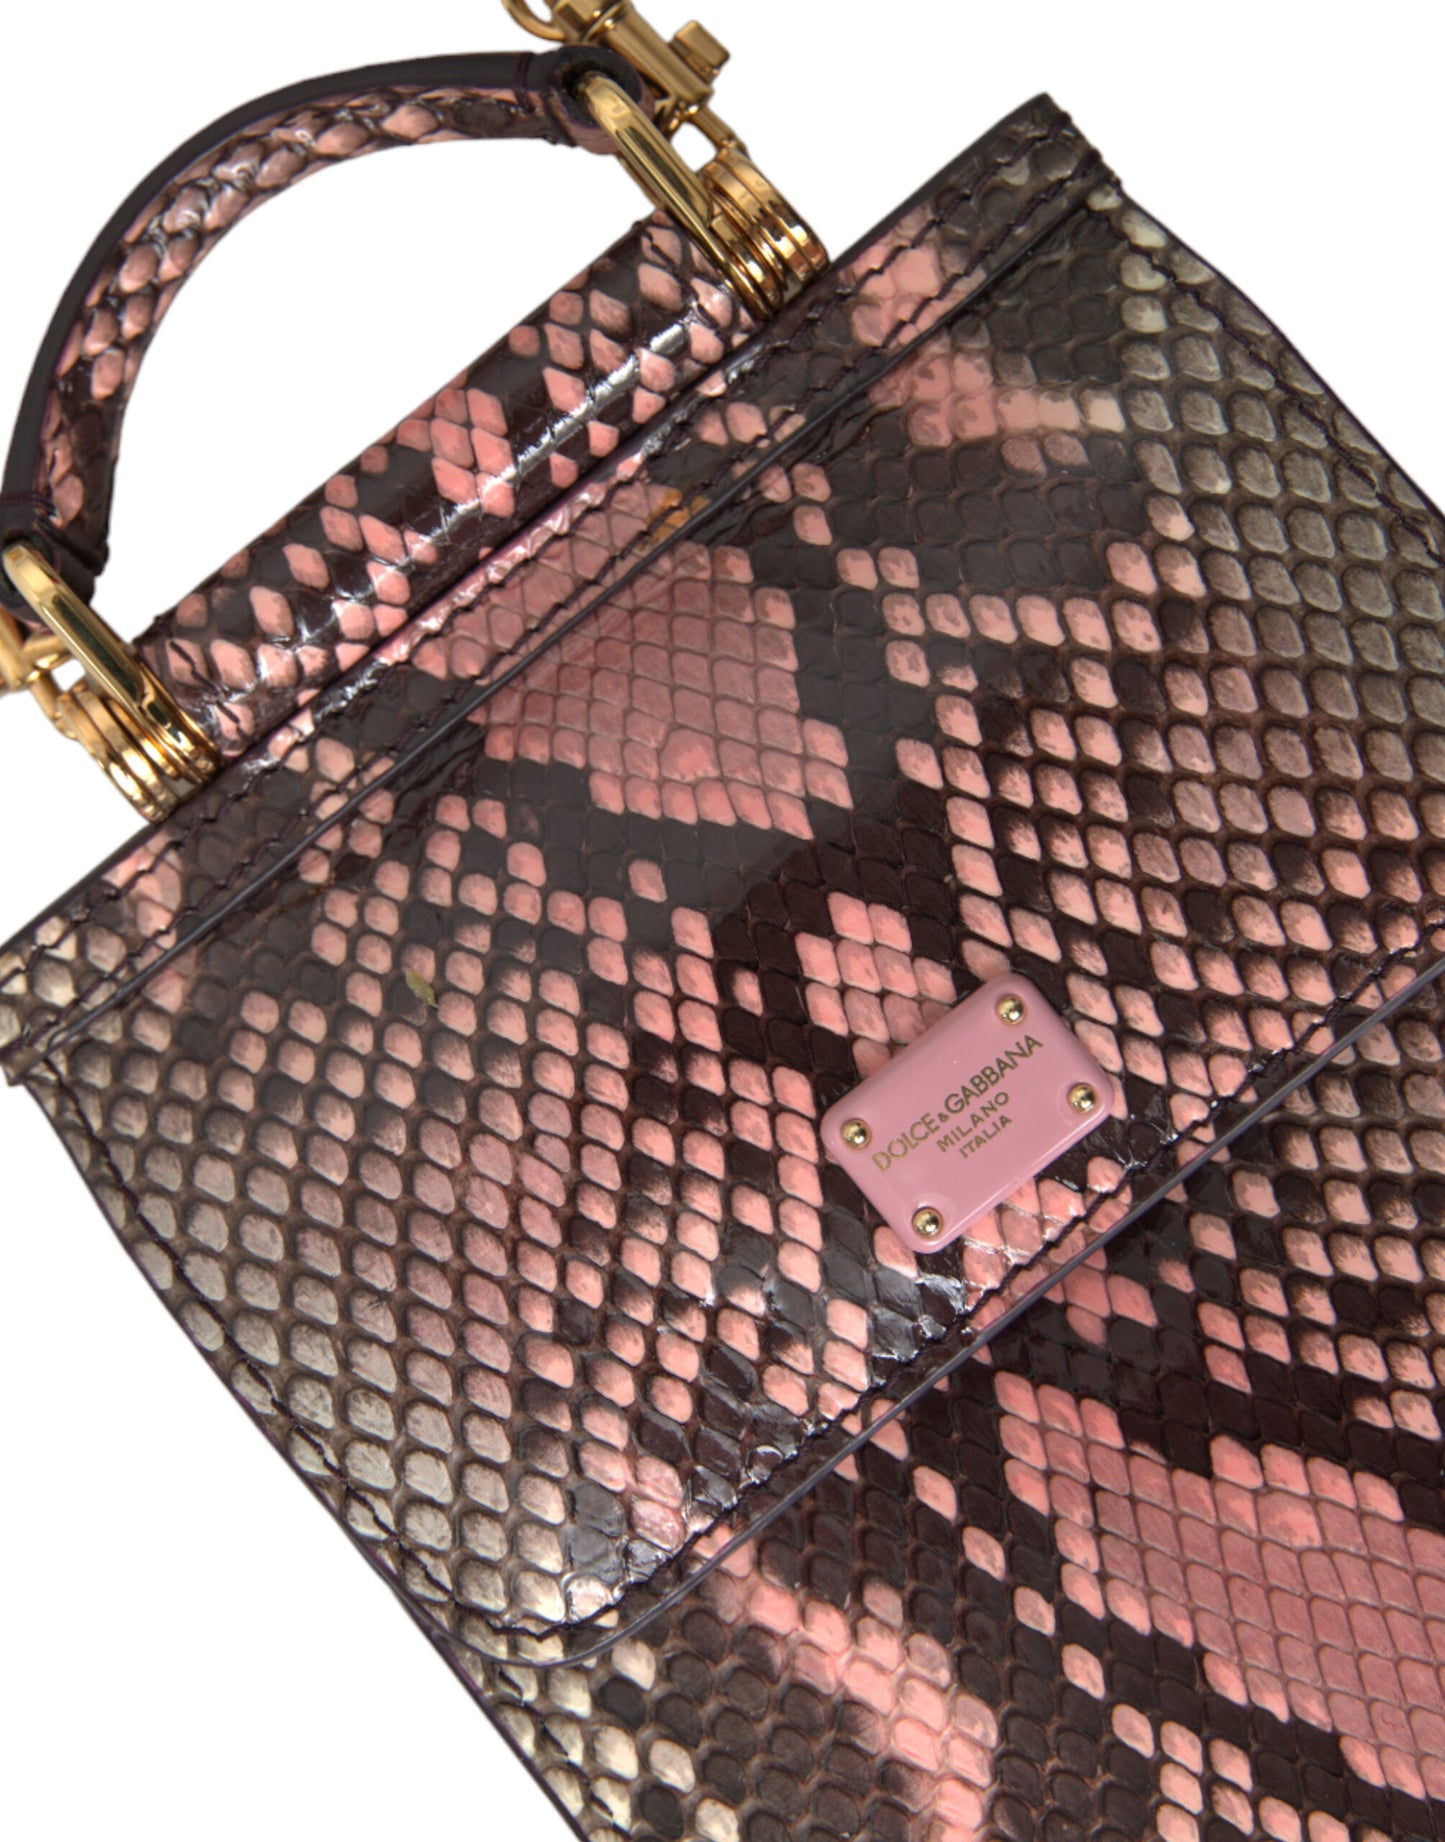 Exquisite Pink Exotic Leather Crossbody Bag